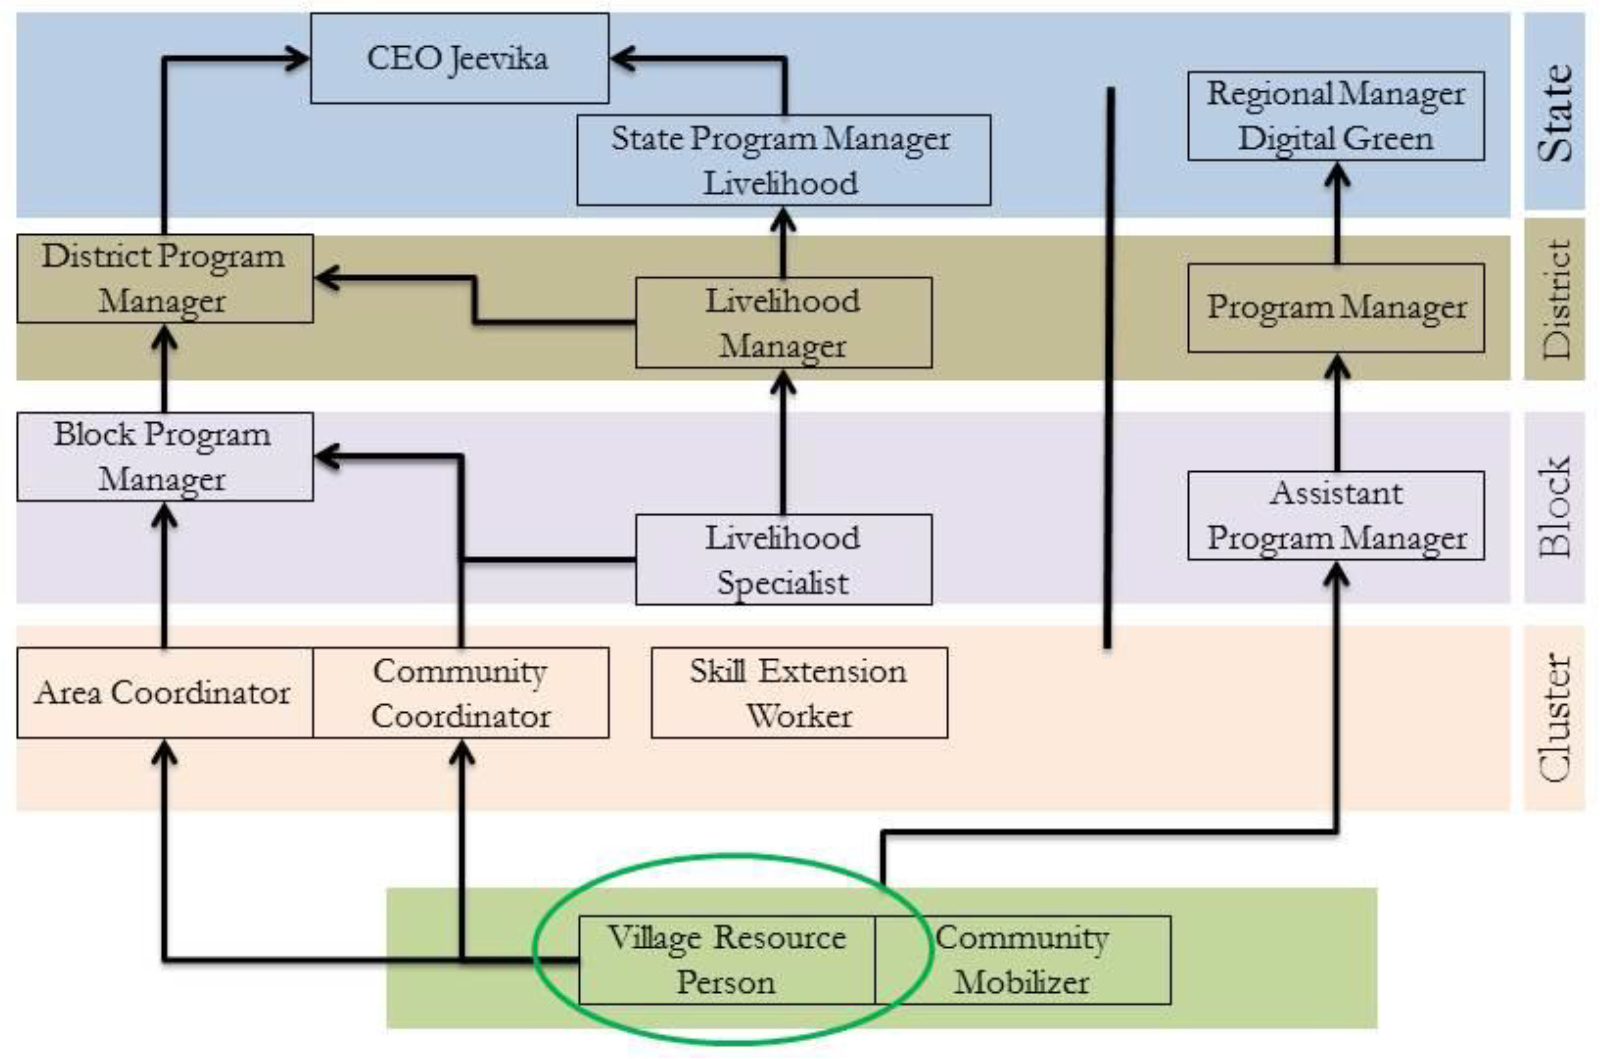 The illustration shows a chart of organisational structure of Jeevika and Digital Green.